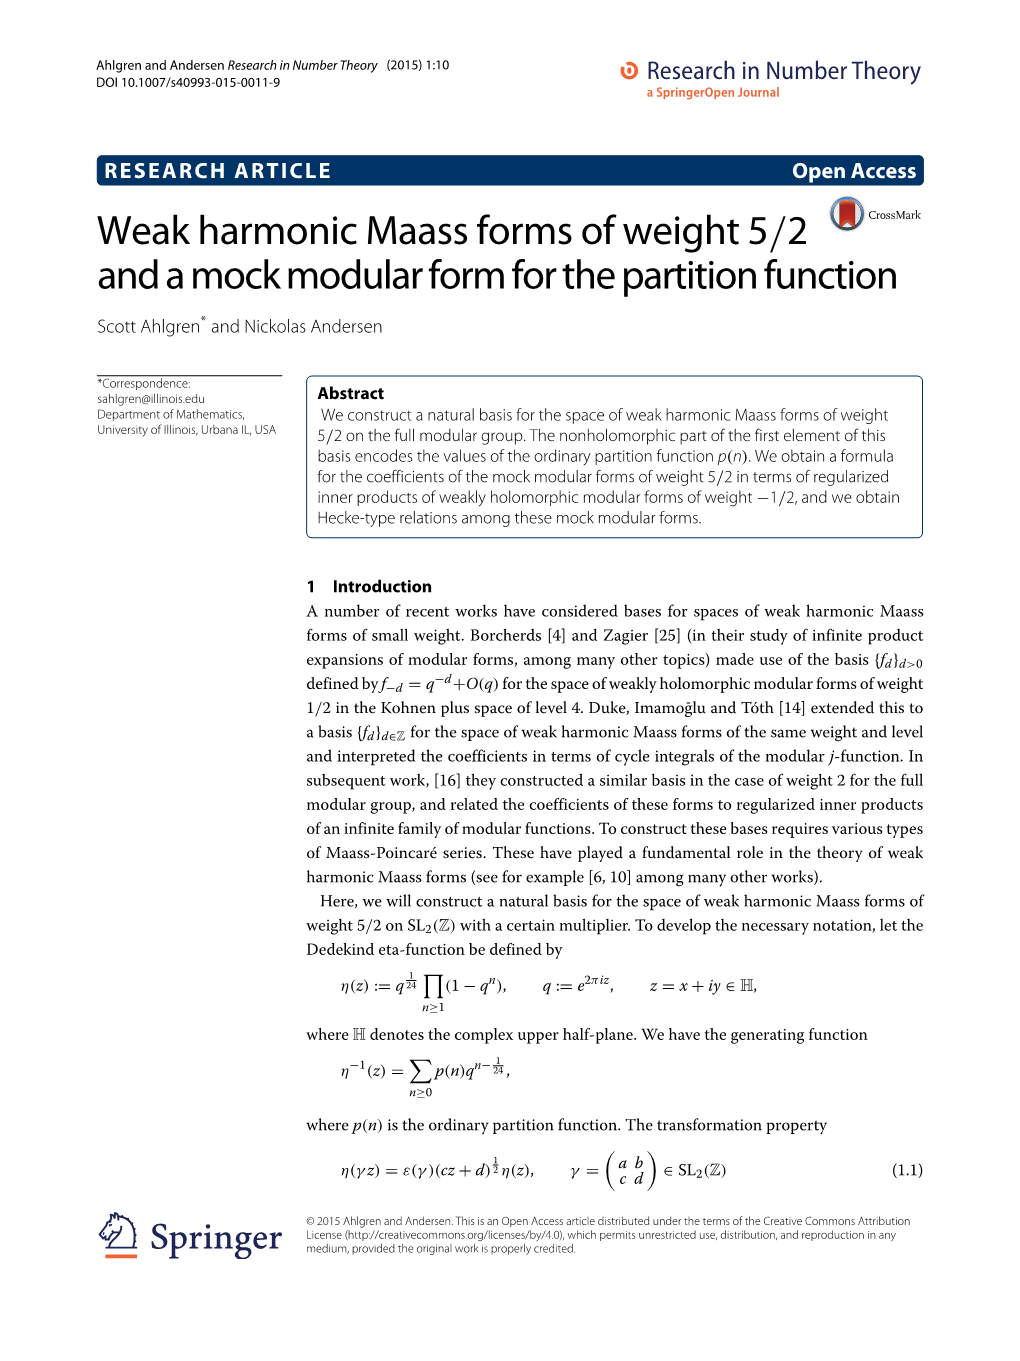 Weak Harmonic Maass Forms of Weight 5/2 and a Mock Modular Form for the Partition Function